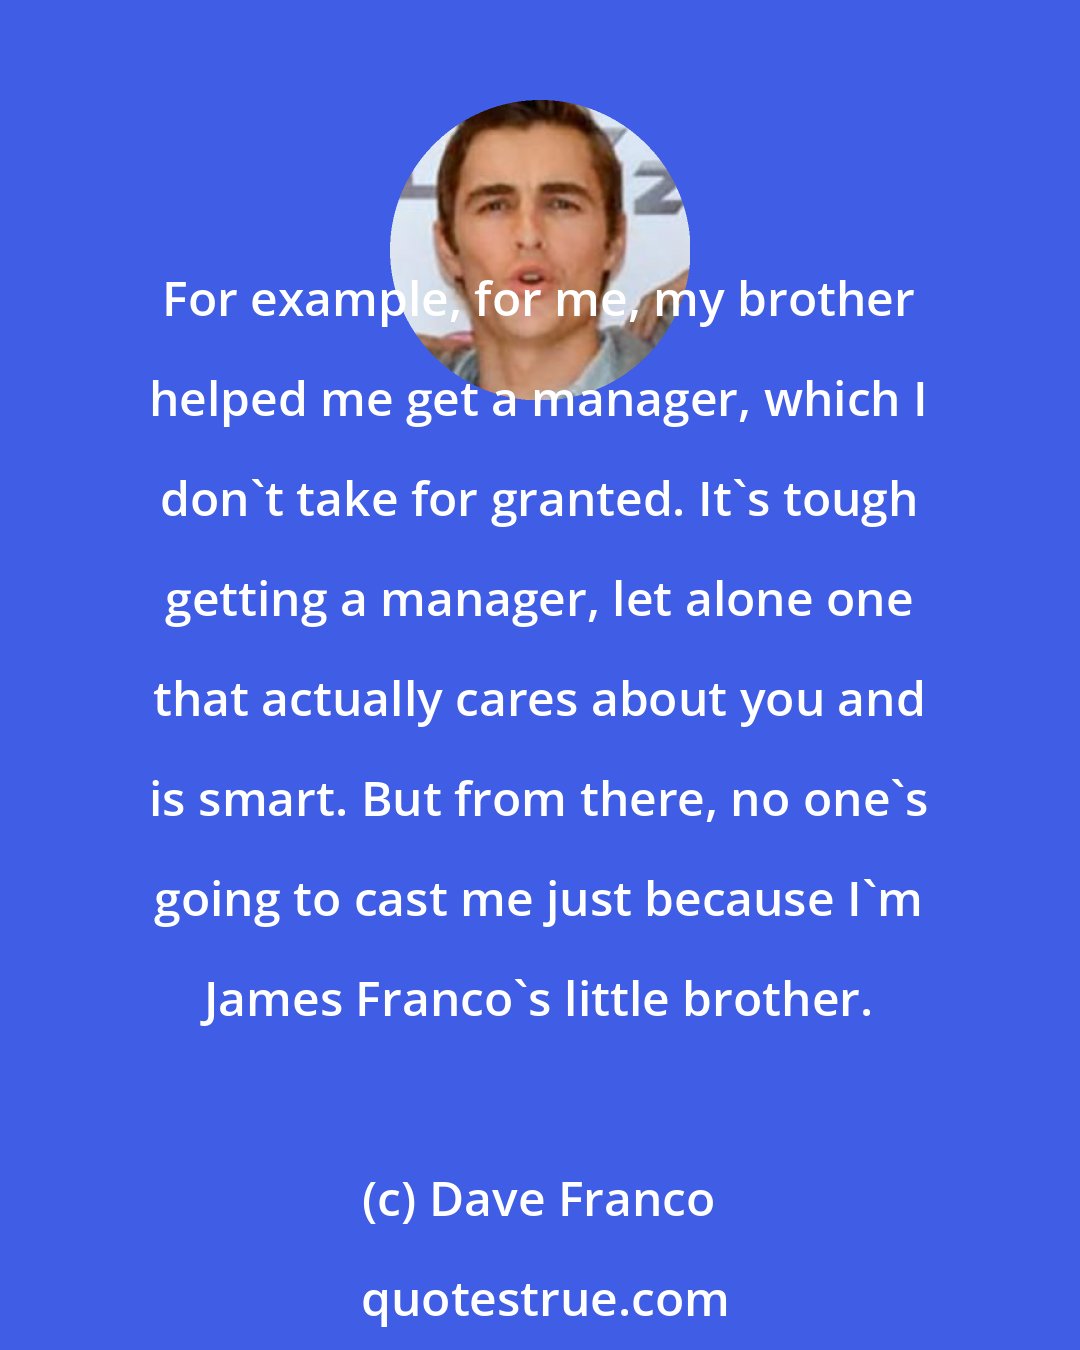 Dave Franco: For example, for me, my brother helped me get a manager, which I don't take for granted. It's tough getting a manager, let alone one that actually cares about you and is smart. But from there, no one's going to cast me just because I'm James Franco's little brother.